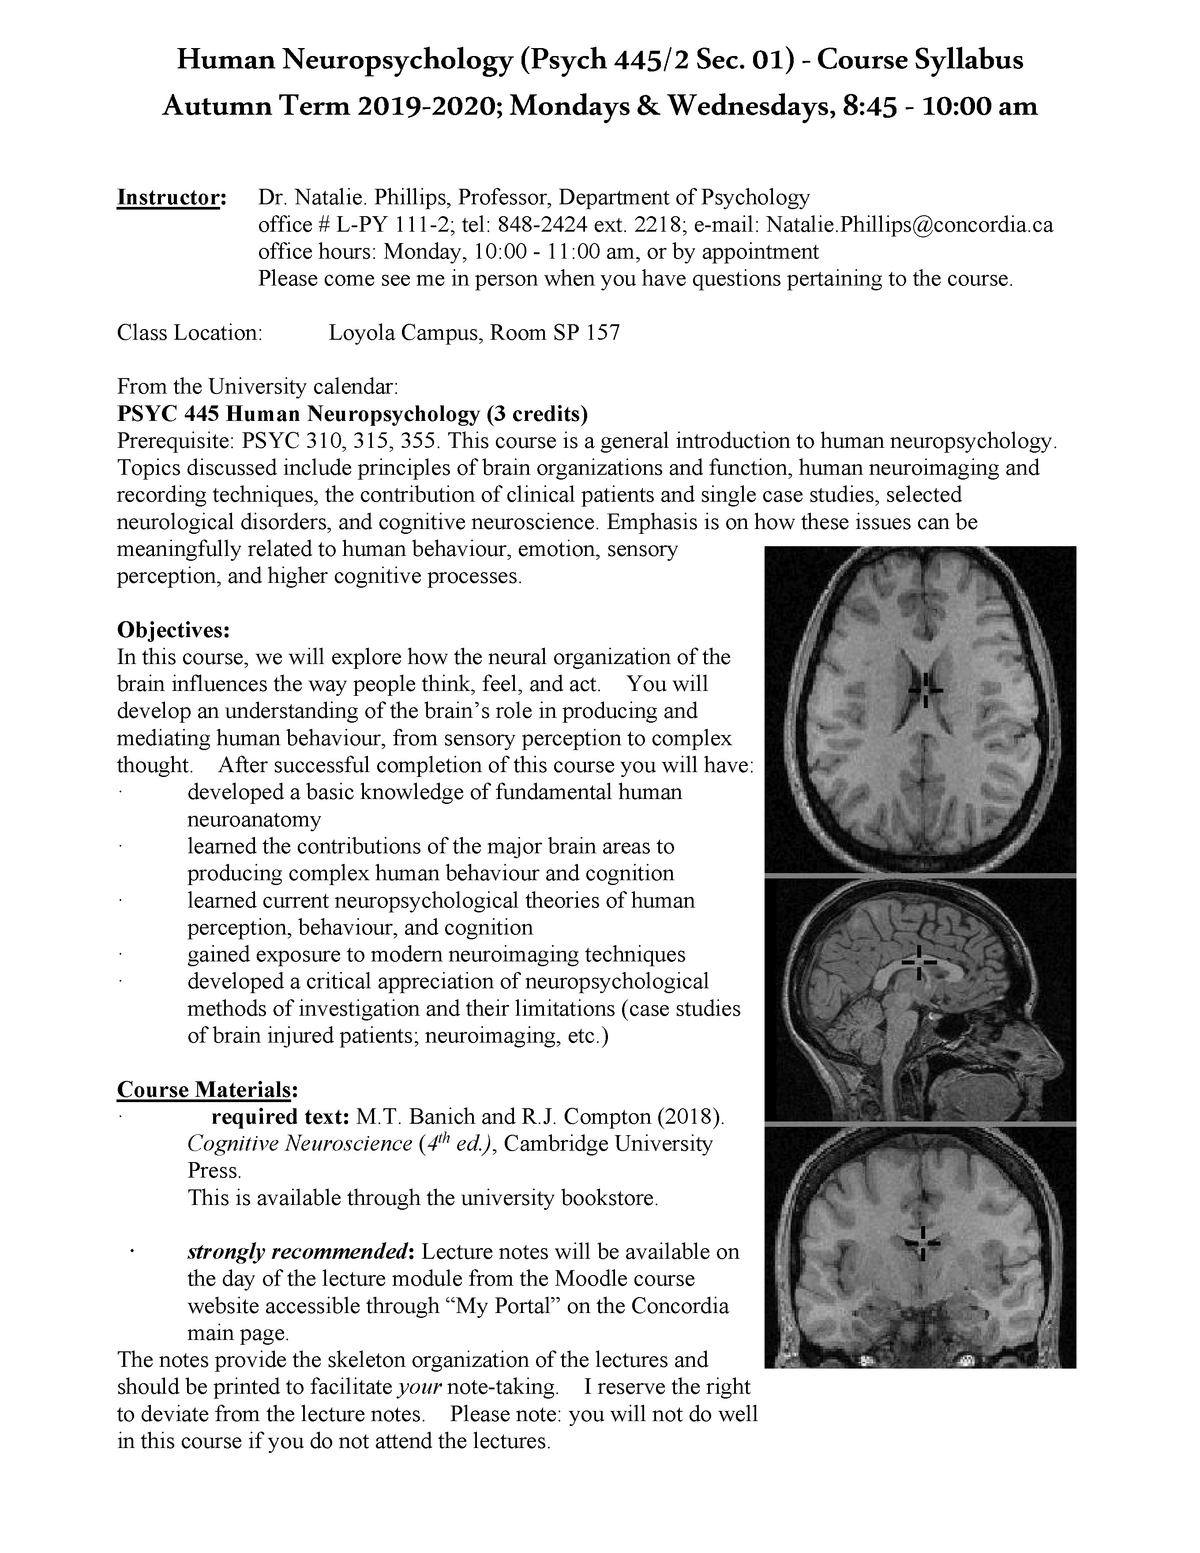 Course Outline 445 - Human Neuropsychology (Psych 445/2 Sec. 01 ...